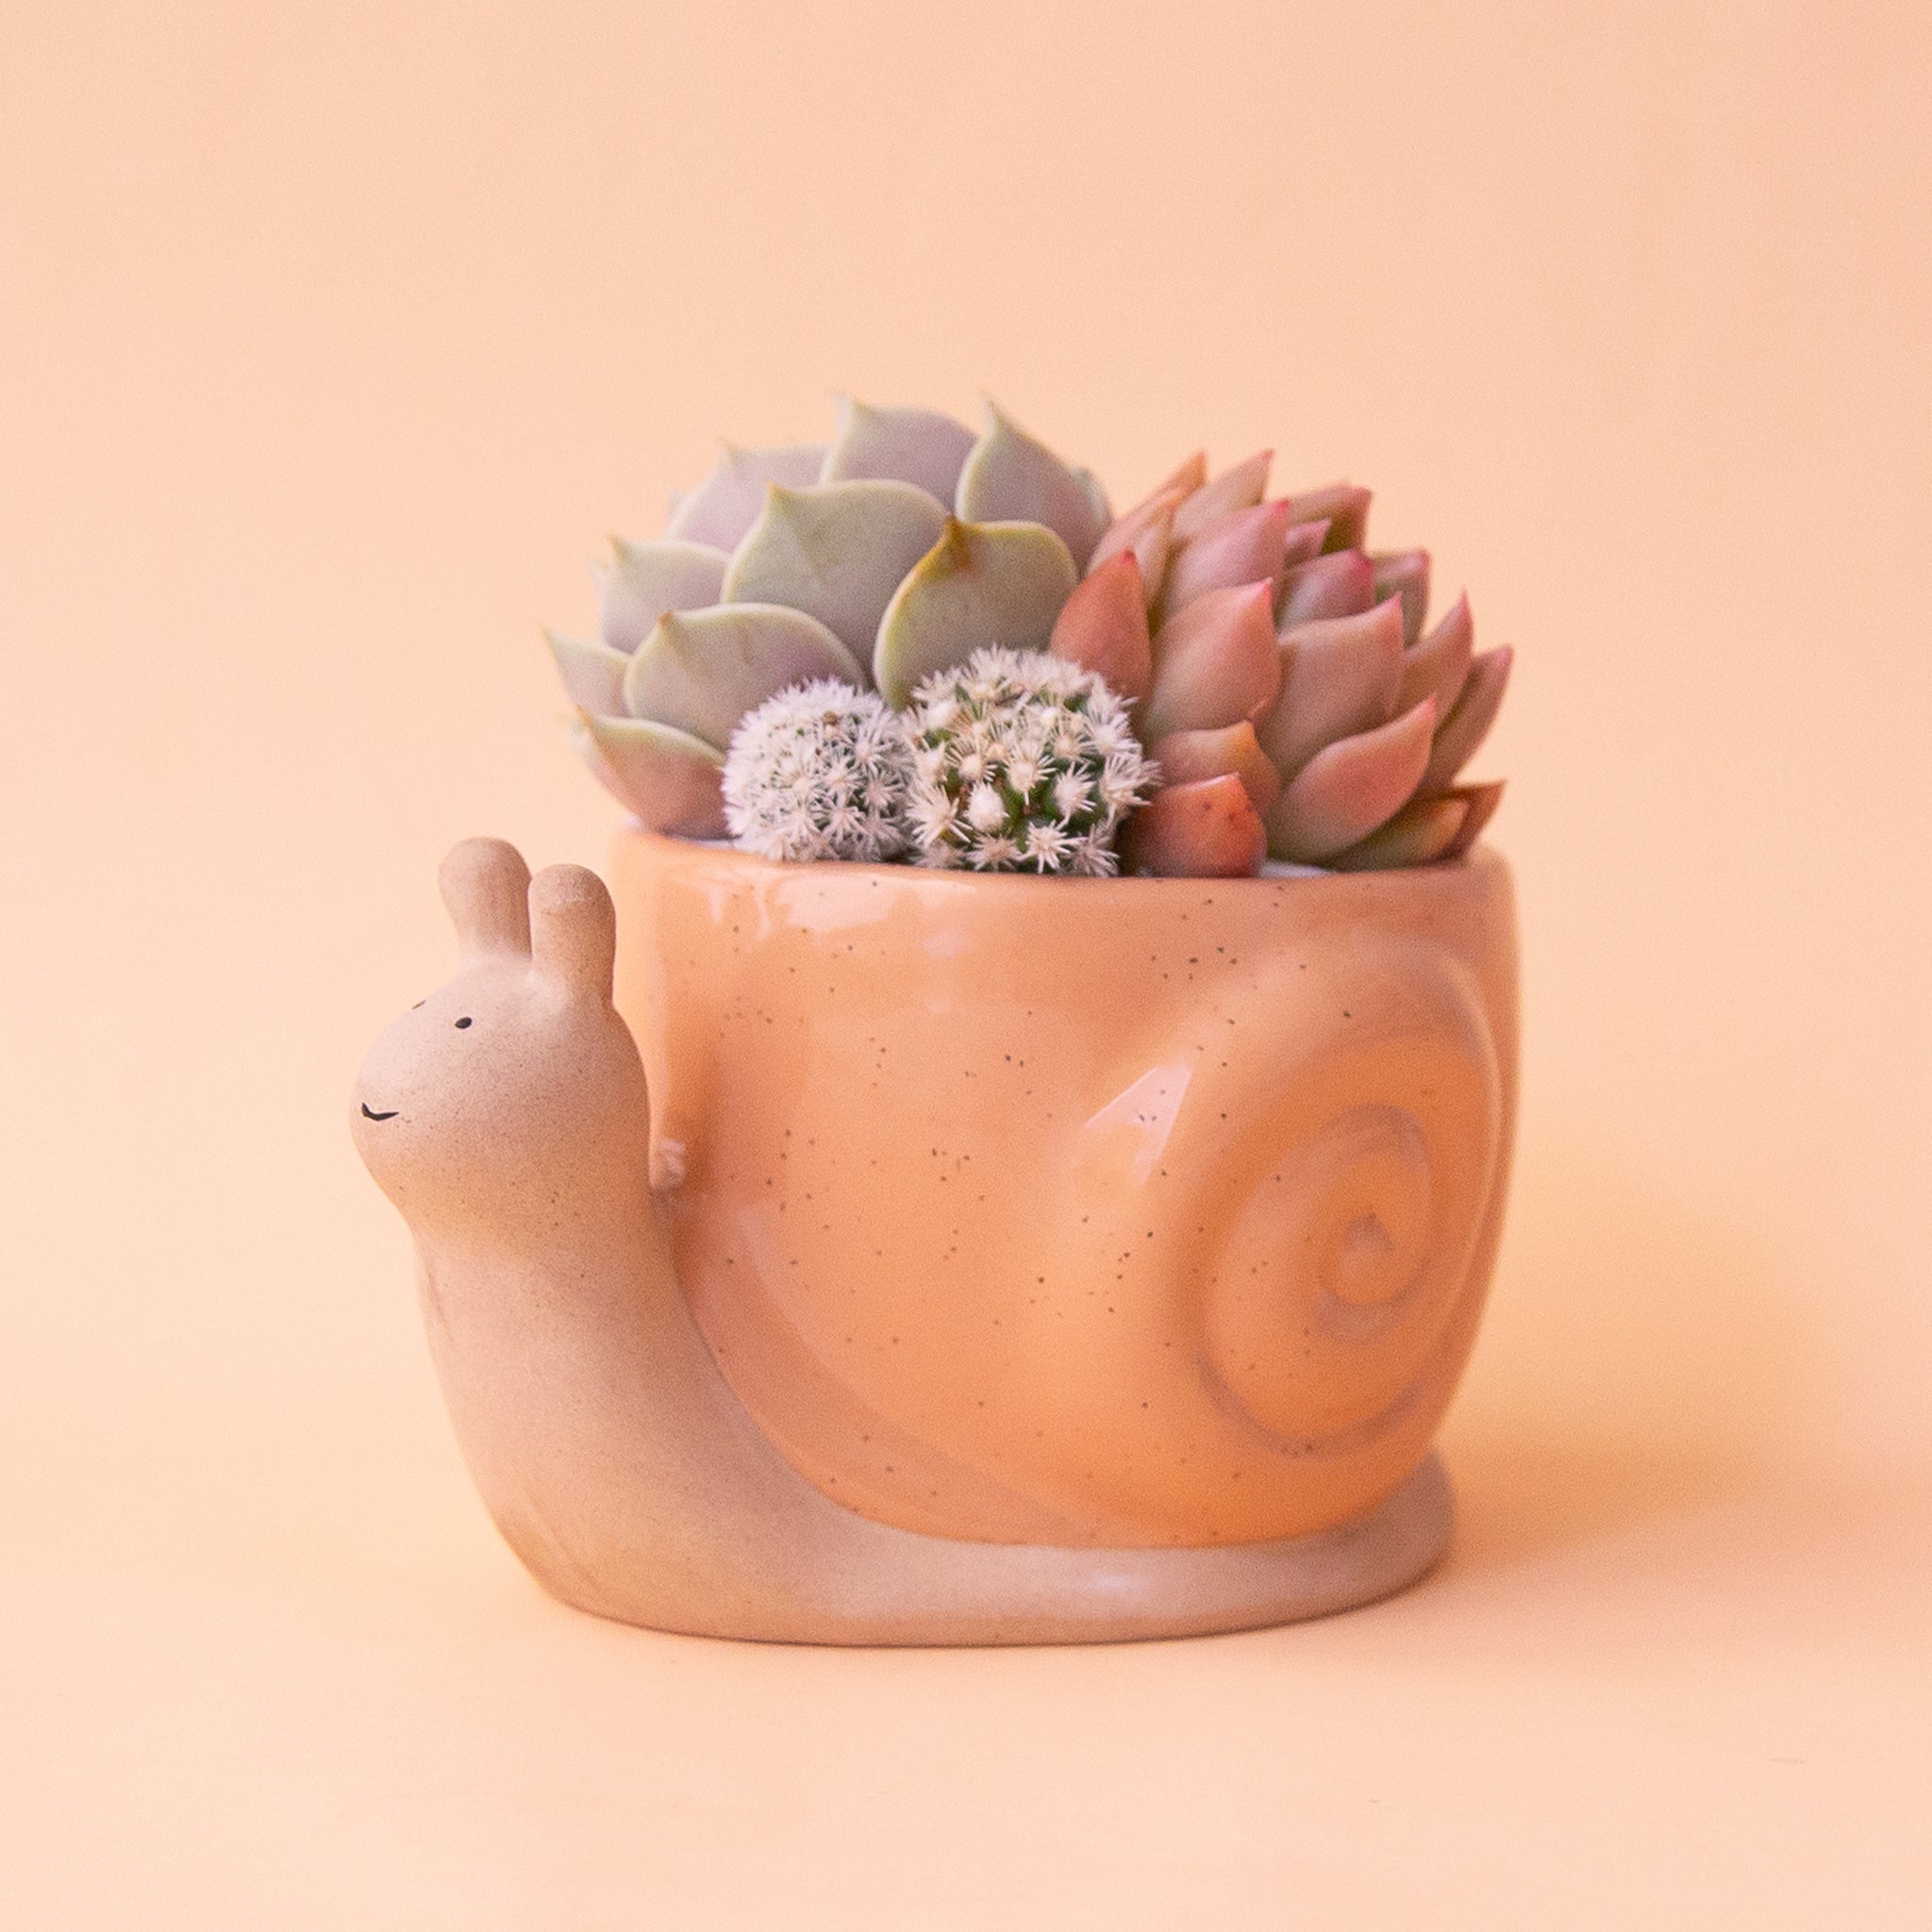 On a peachy background is an orange snail shaped planter filled with a cactus and succulent arrangement.